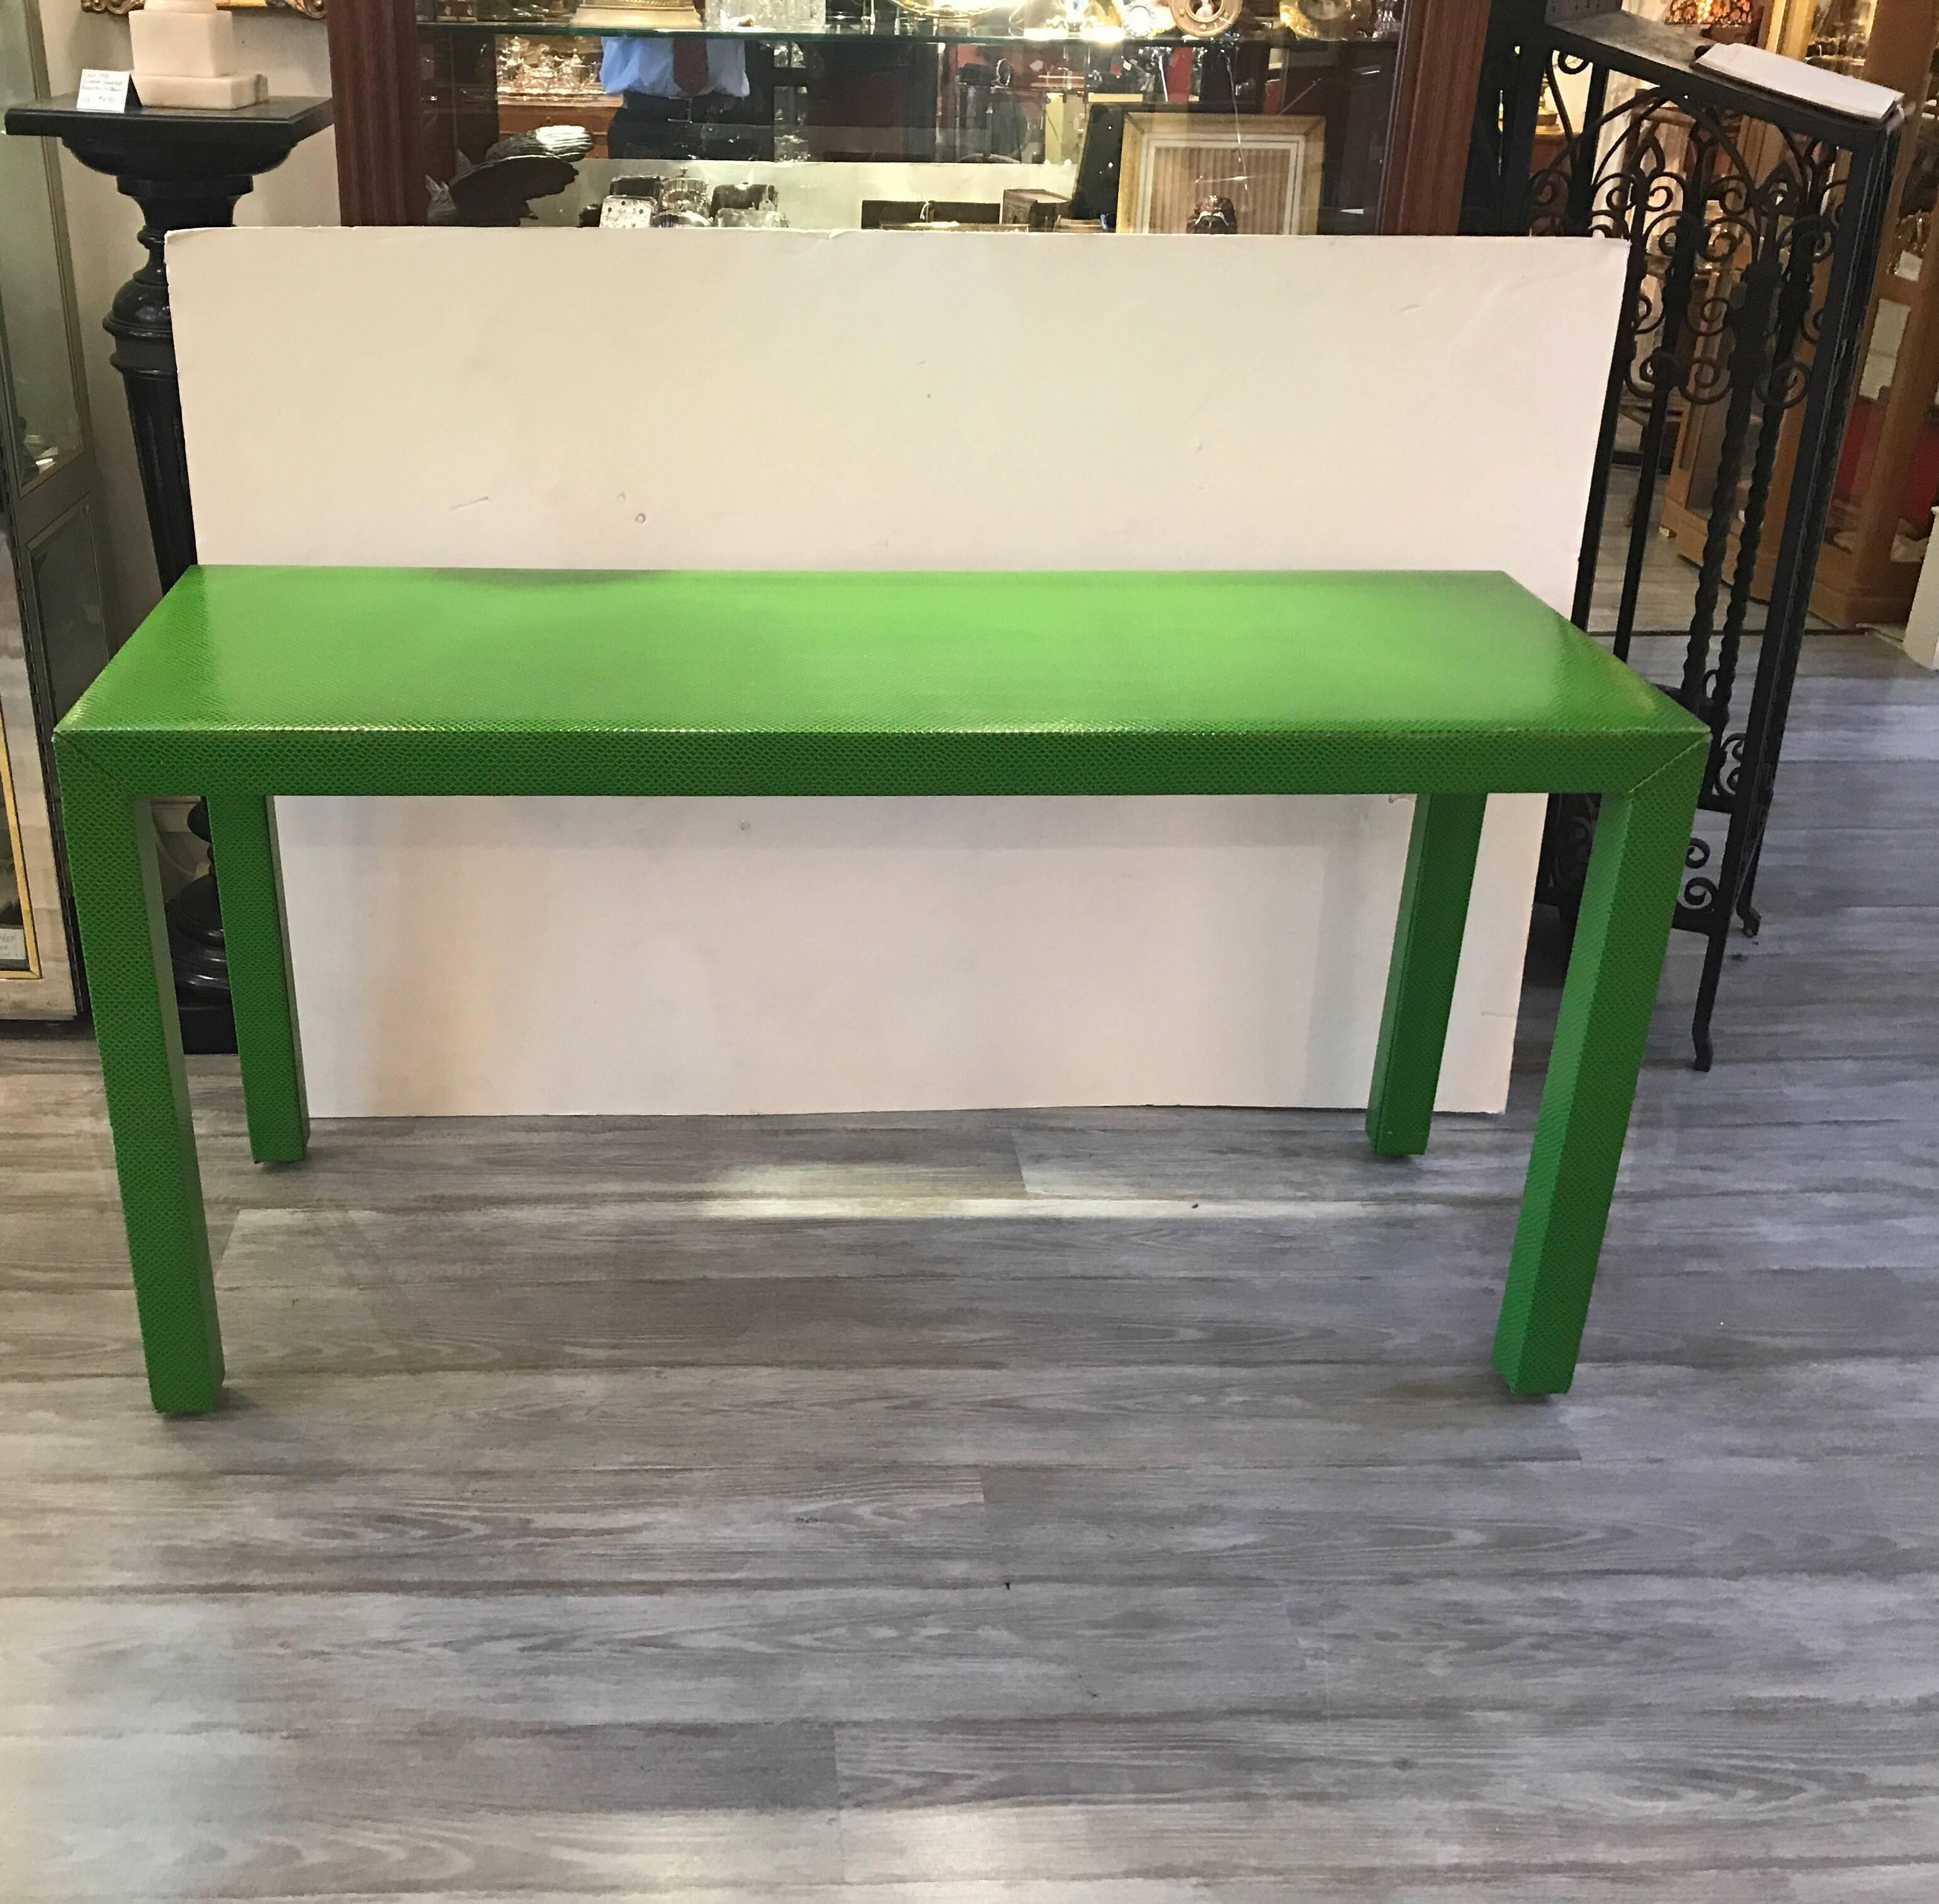 An iconic, 1970s Parsons console table in an unexpected vibrant green faux snakeskin covering.